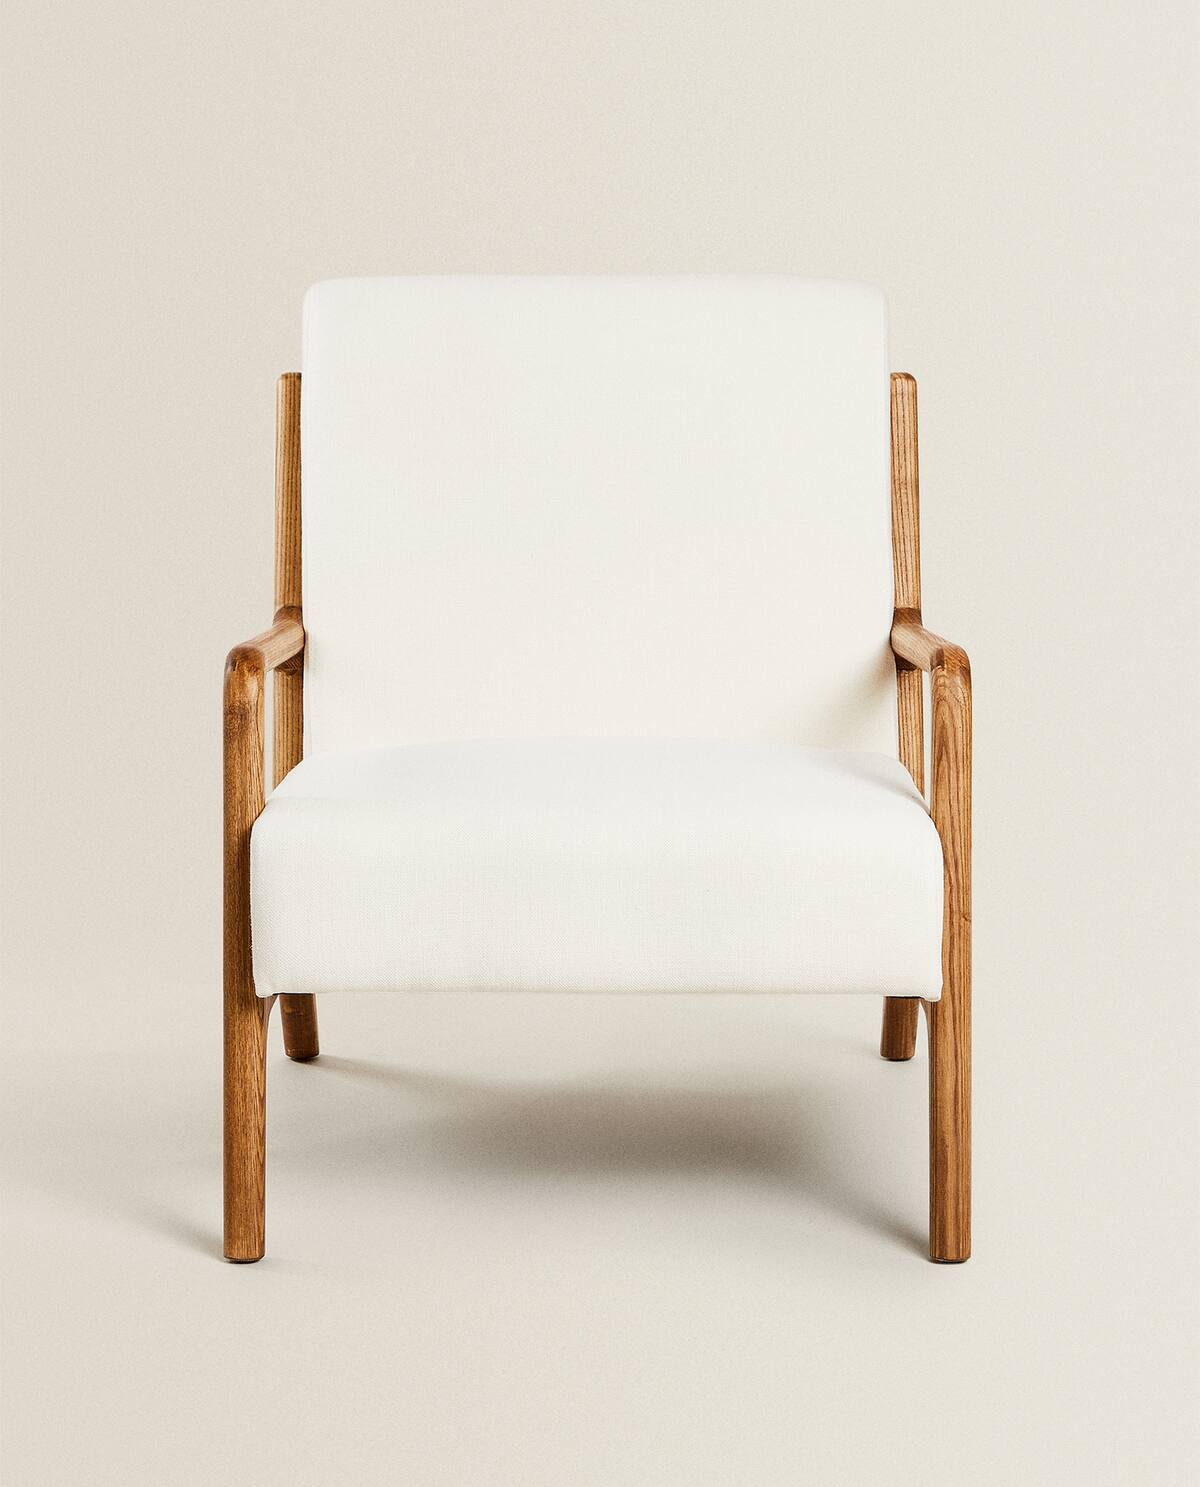 Zara Home - the Ash Wood Armchair with Linen Upholstery